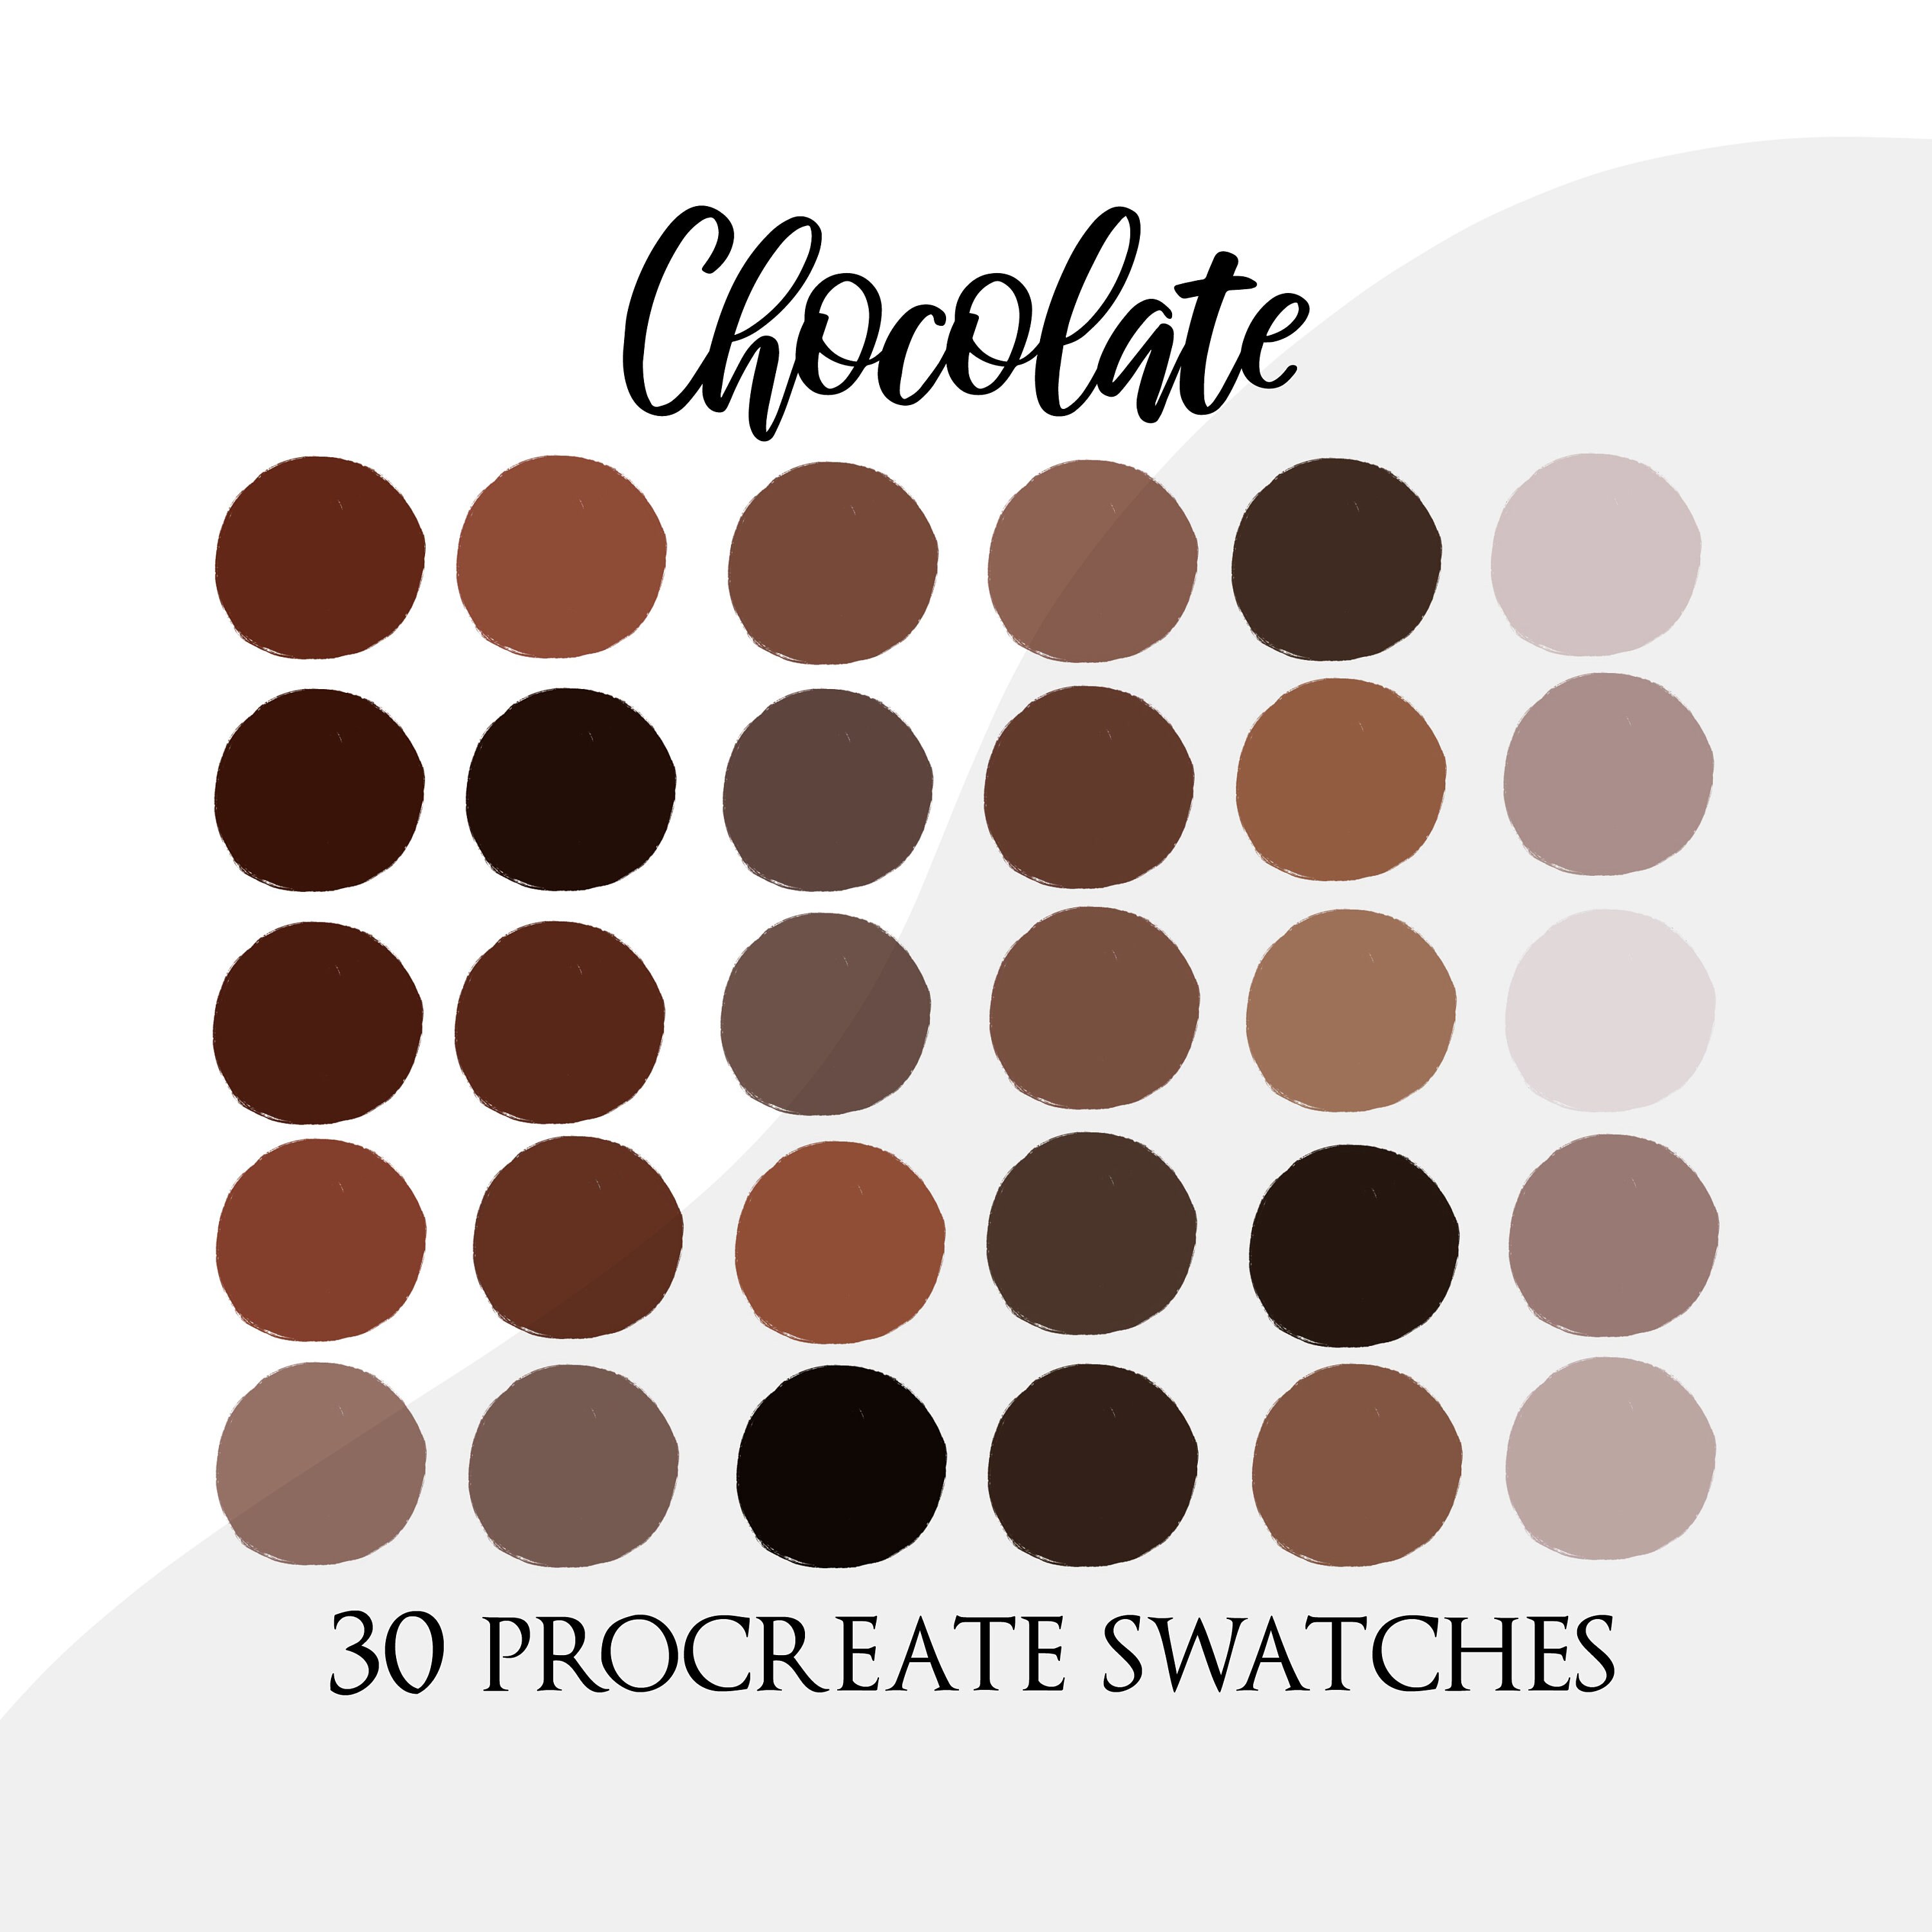 Chocolate, brushes for Photoshop, hot chocolate, sweet decor, abr files,  cocoa, milk chocolate, coffee, cappuccino